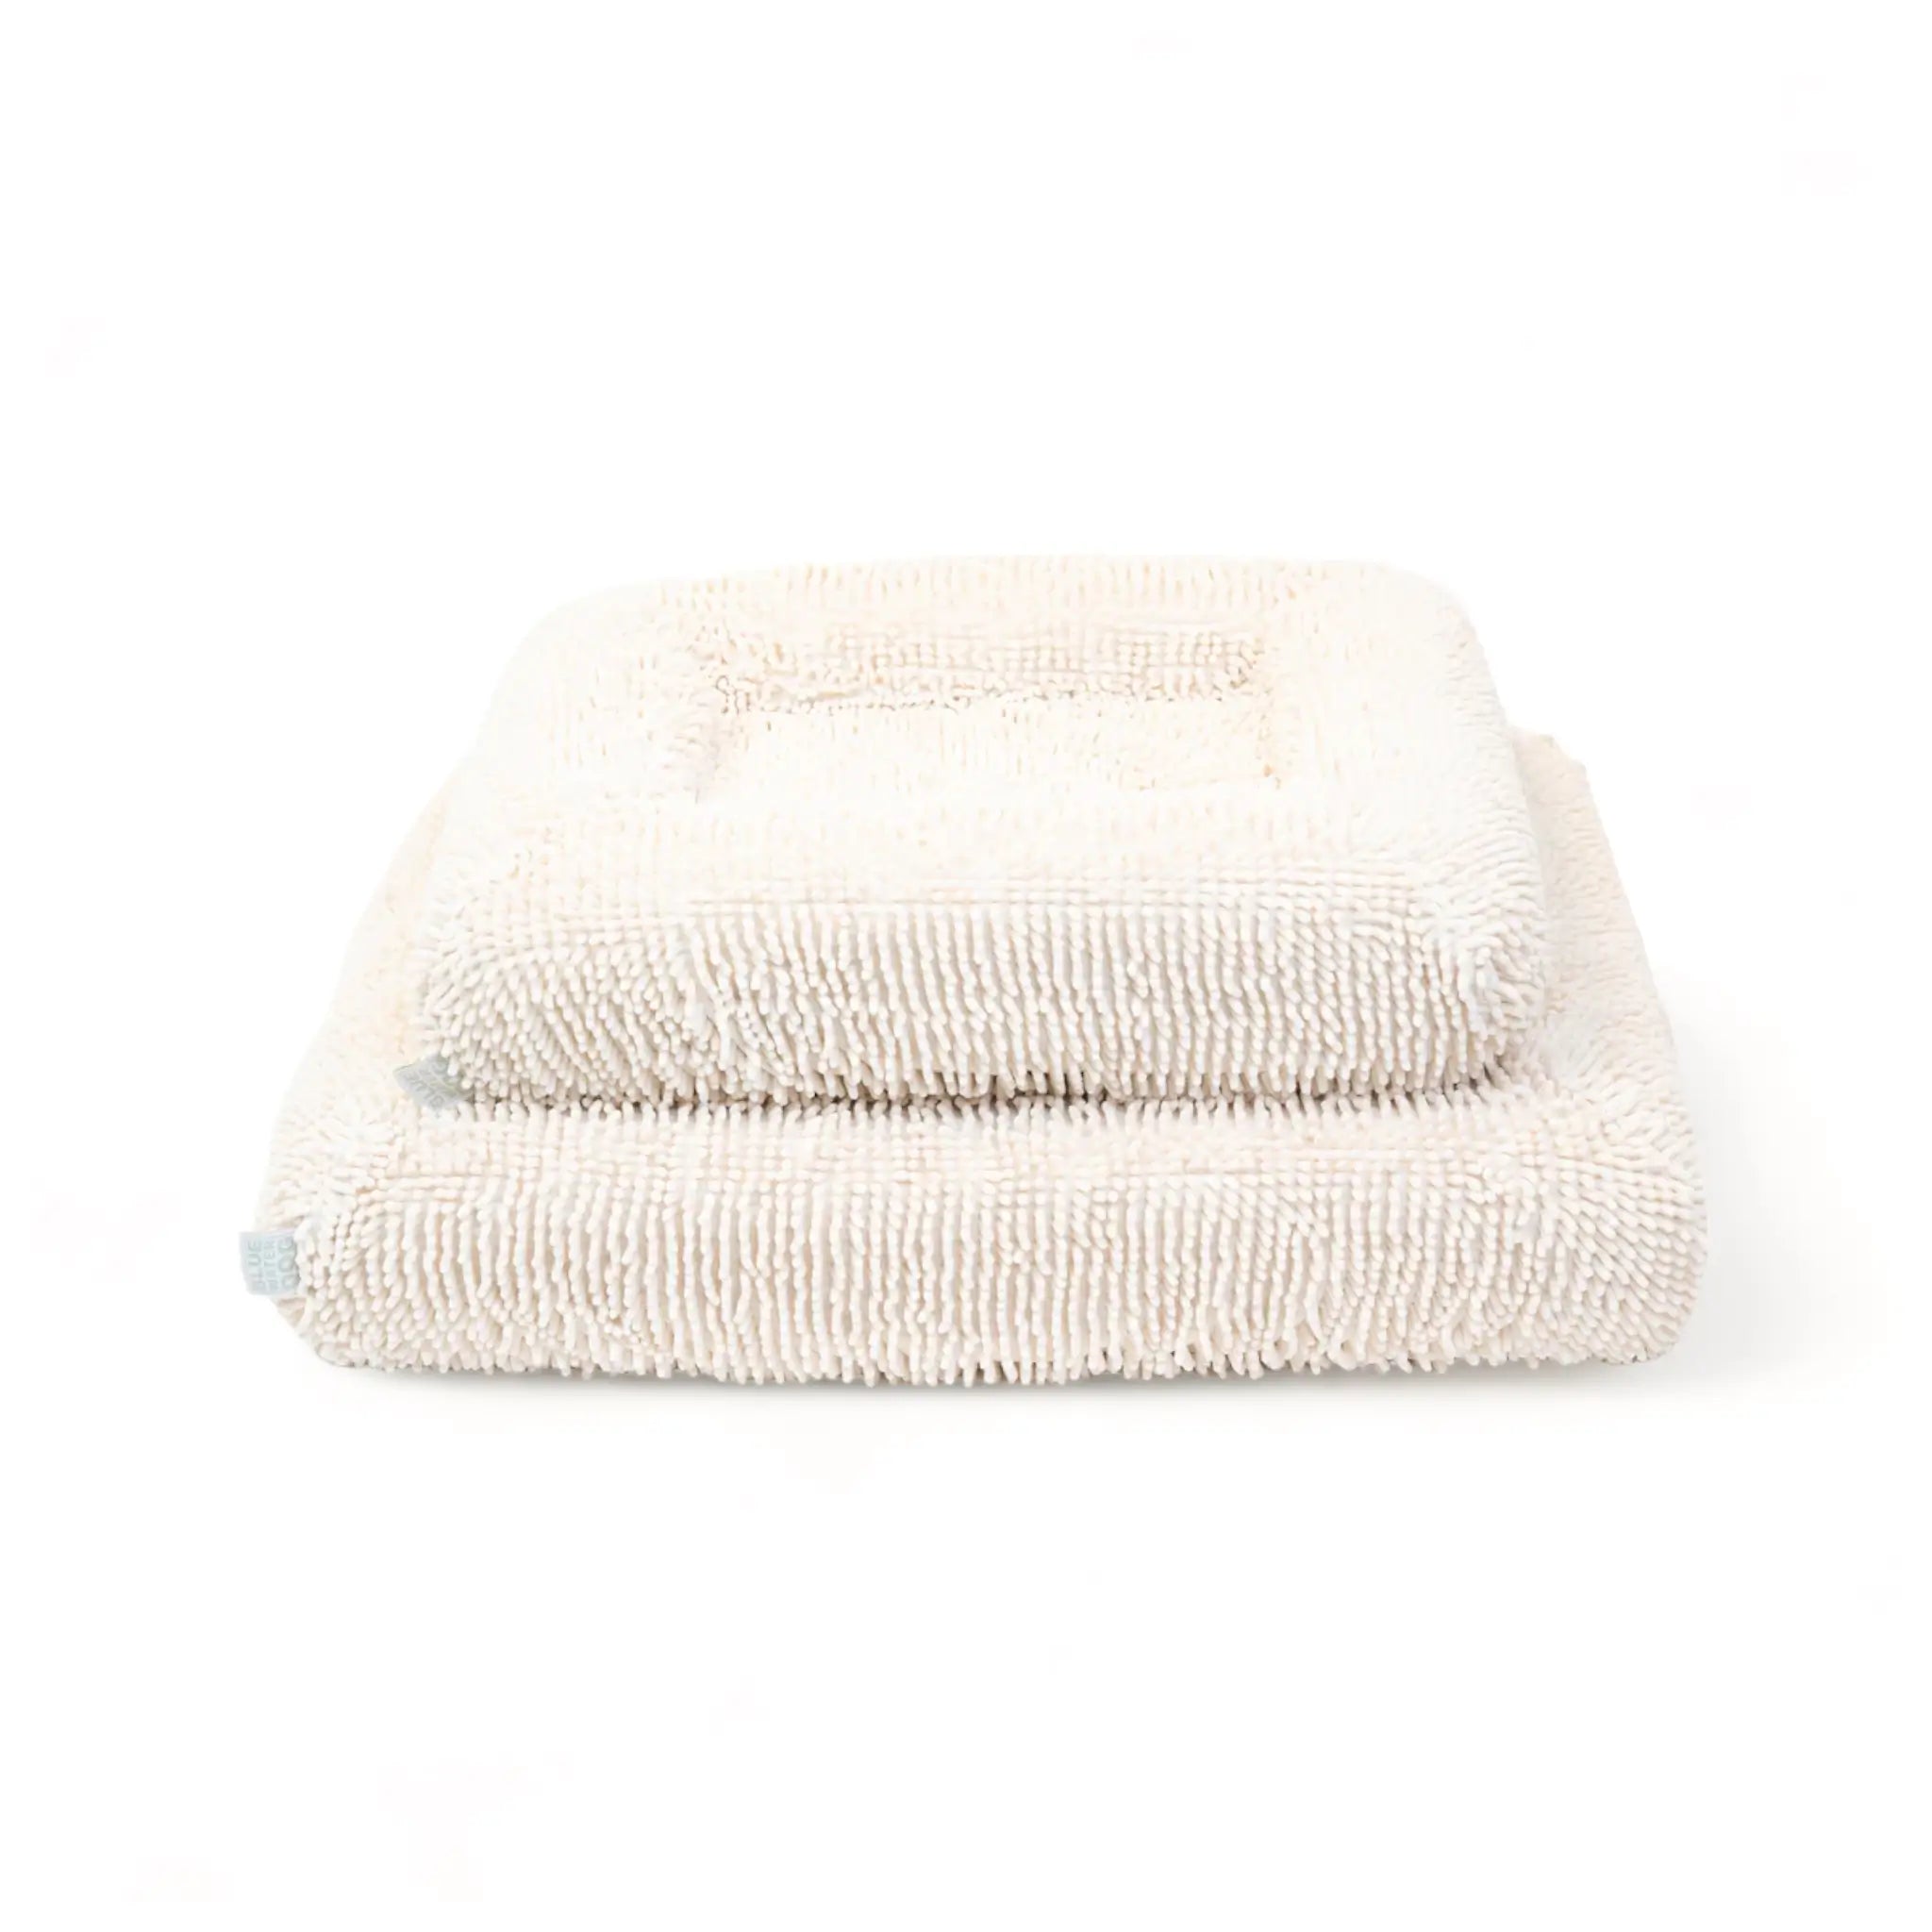 Two orthopedic memory foam dog beds with cream-colored shaggy towel covers stacked on top of each other.